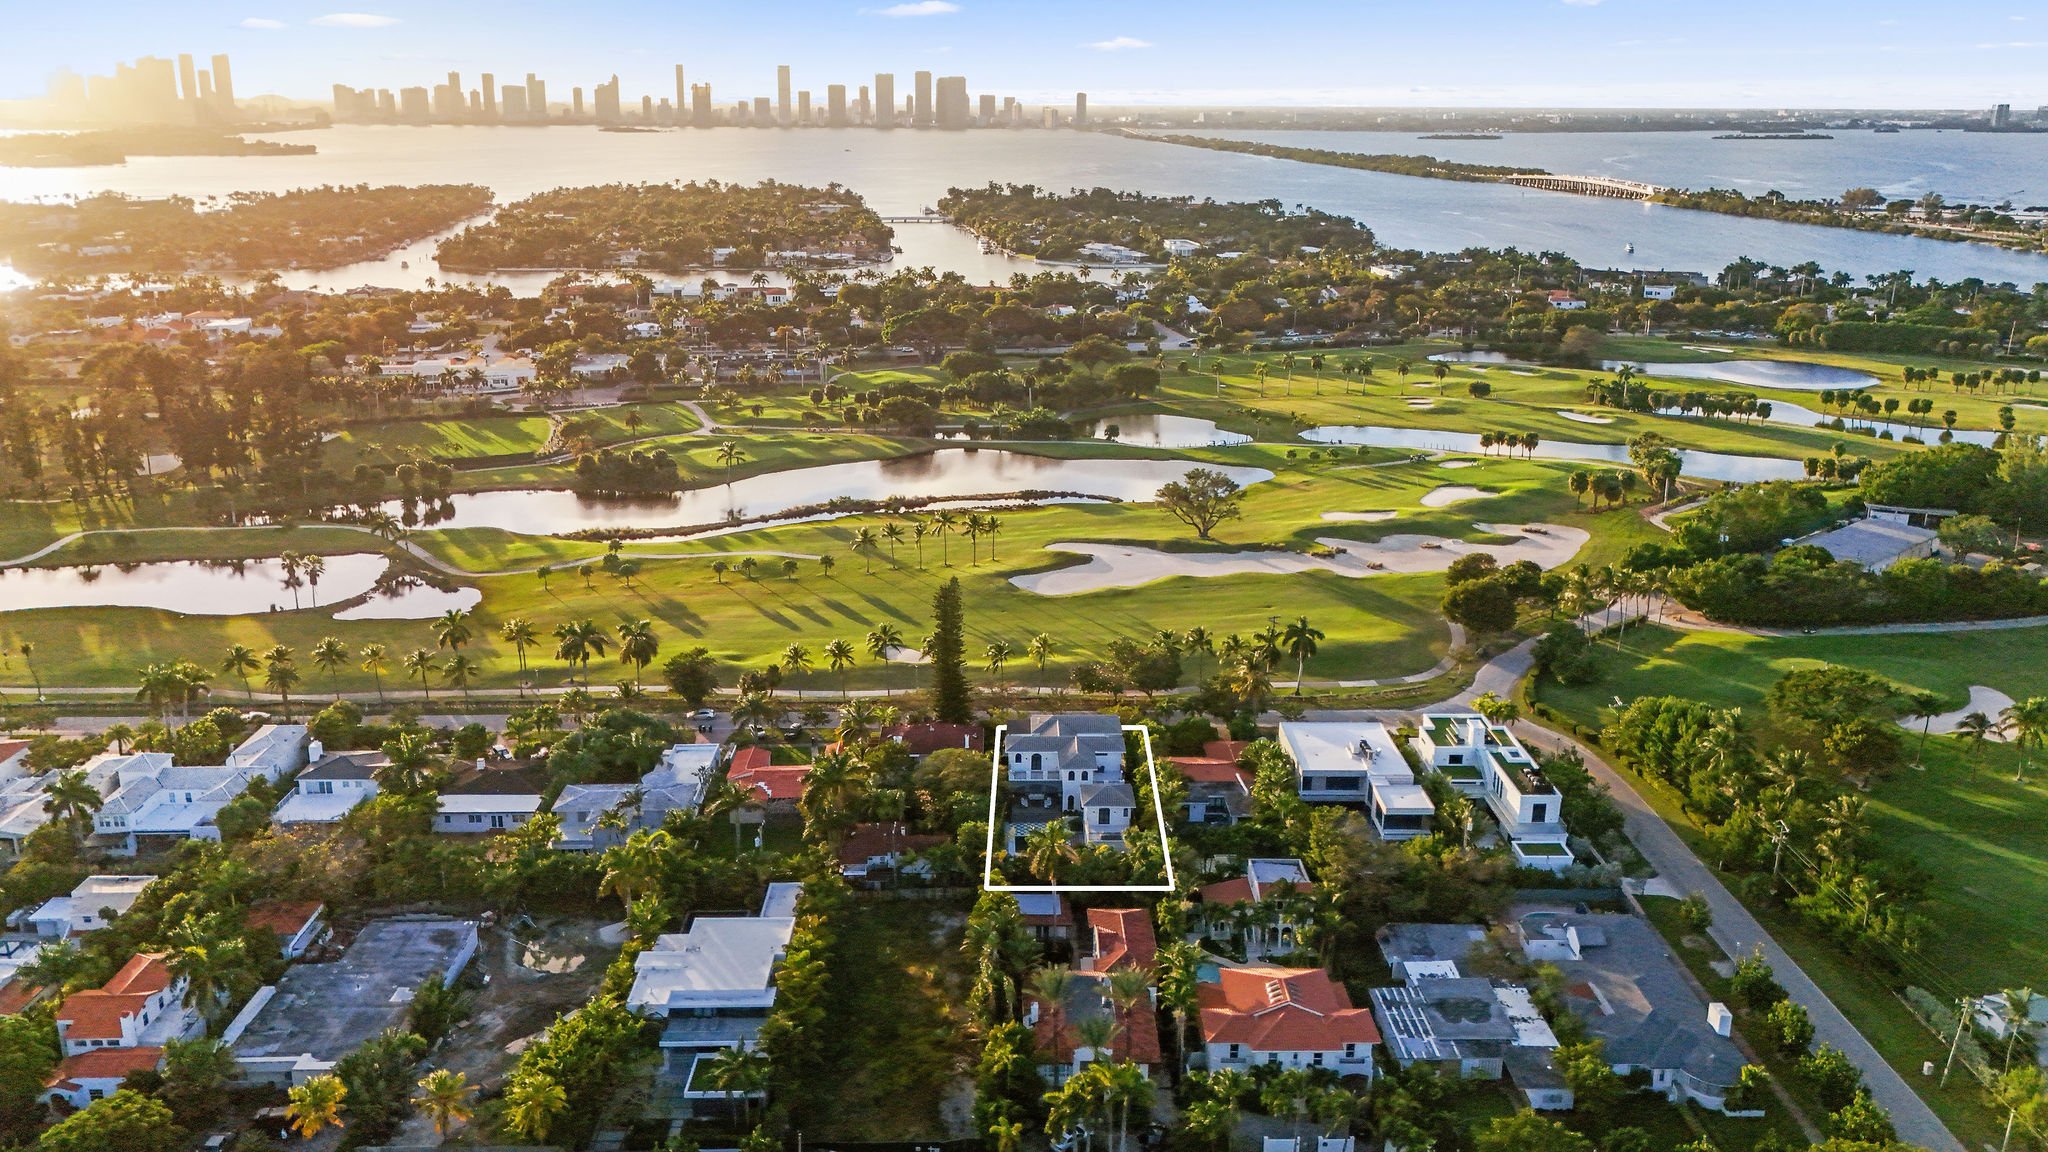 Non-Waterfront Home On Miami Beach Golf Course Sells For $9.5 Million 1.jpg